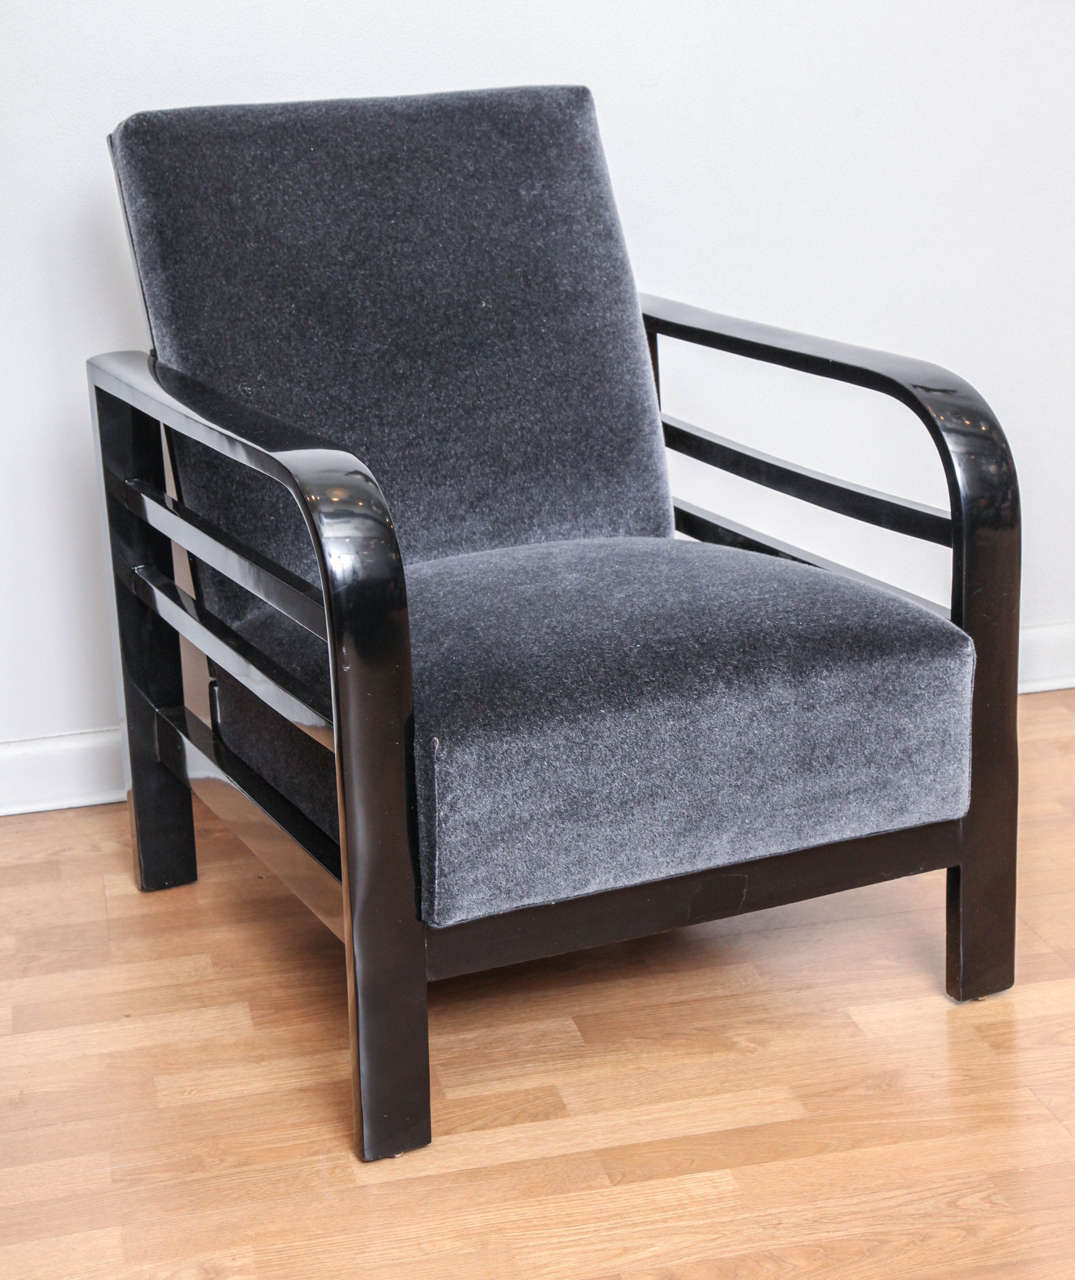 A pair of Bauhaus armchairs. Black lacquer. Newly upholstered in grey or black mohair.